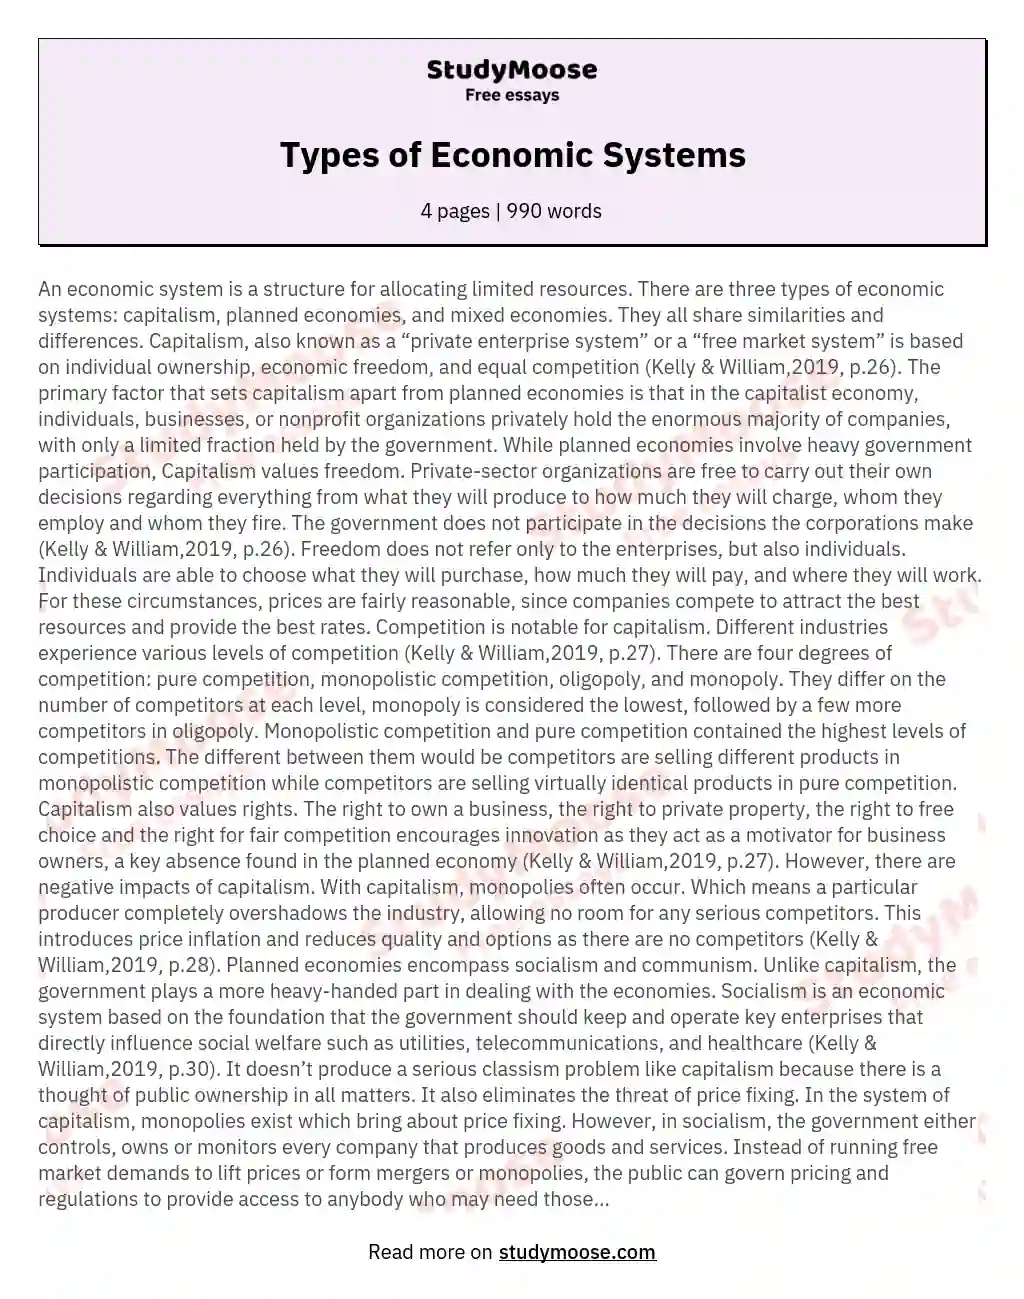 Types of Economic Systems essay